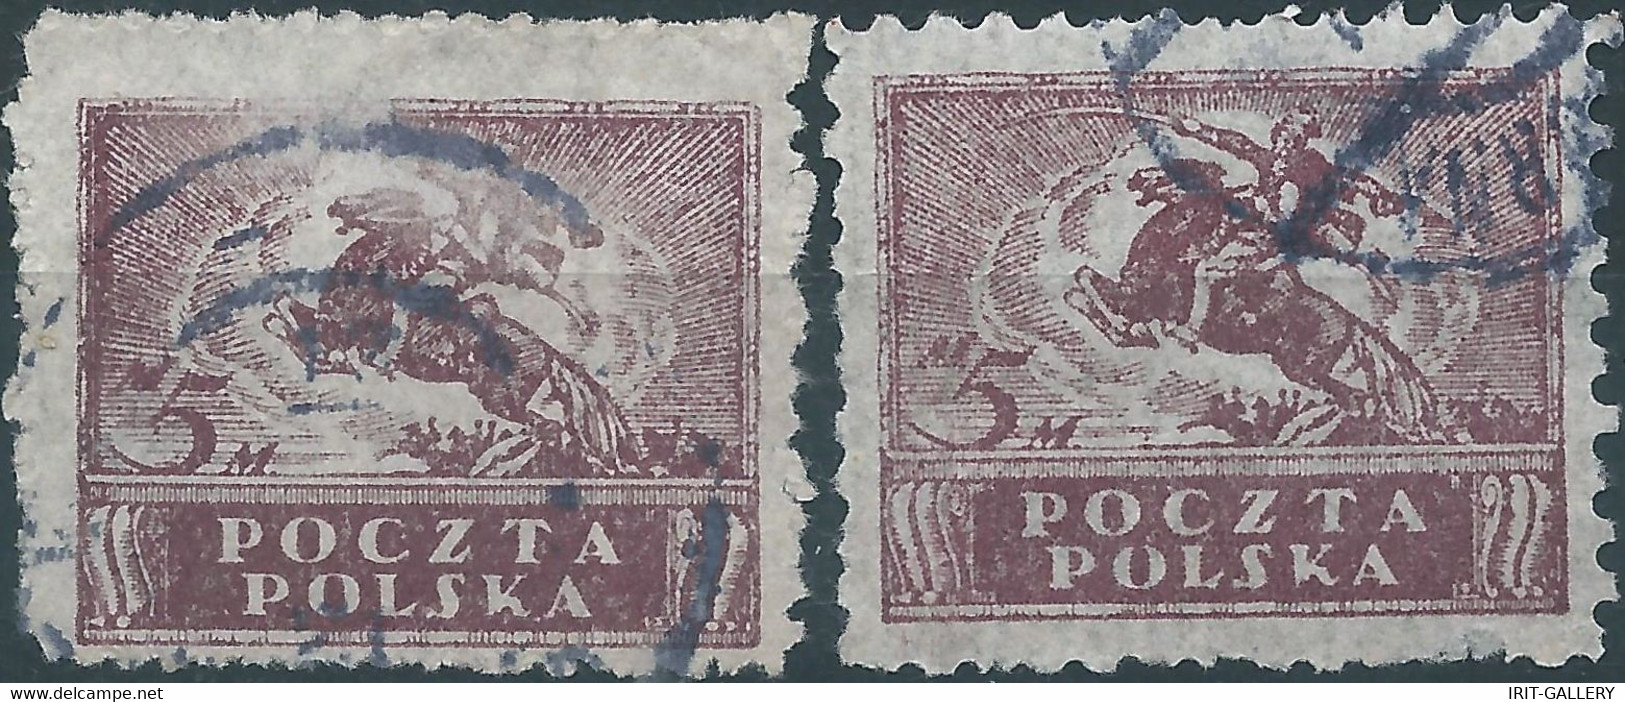 POLONIA-POLAND-POLSKA,1919 North Poland Issues,2x 5M Violet,Obliterated - Used Stamps